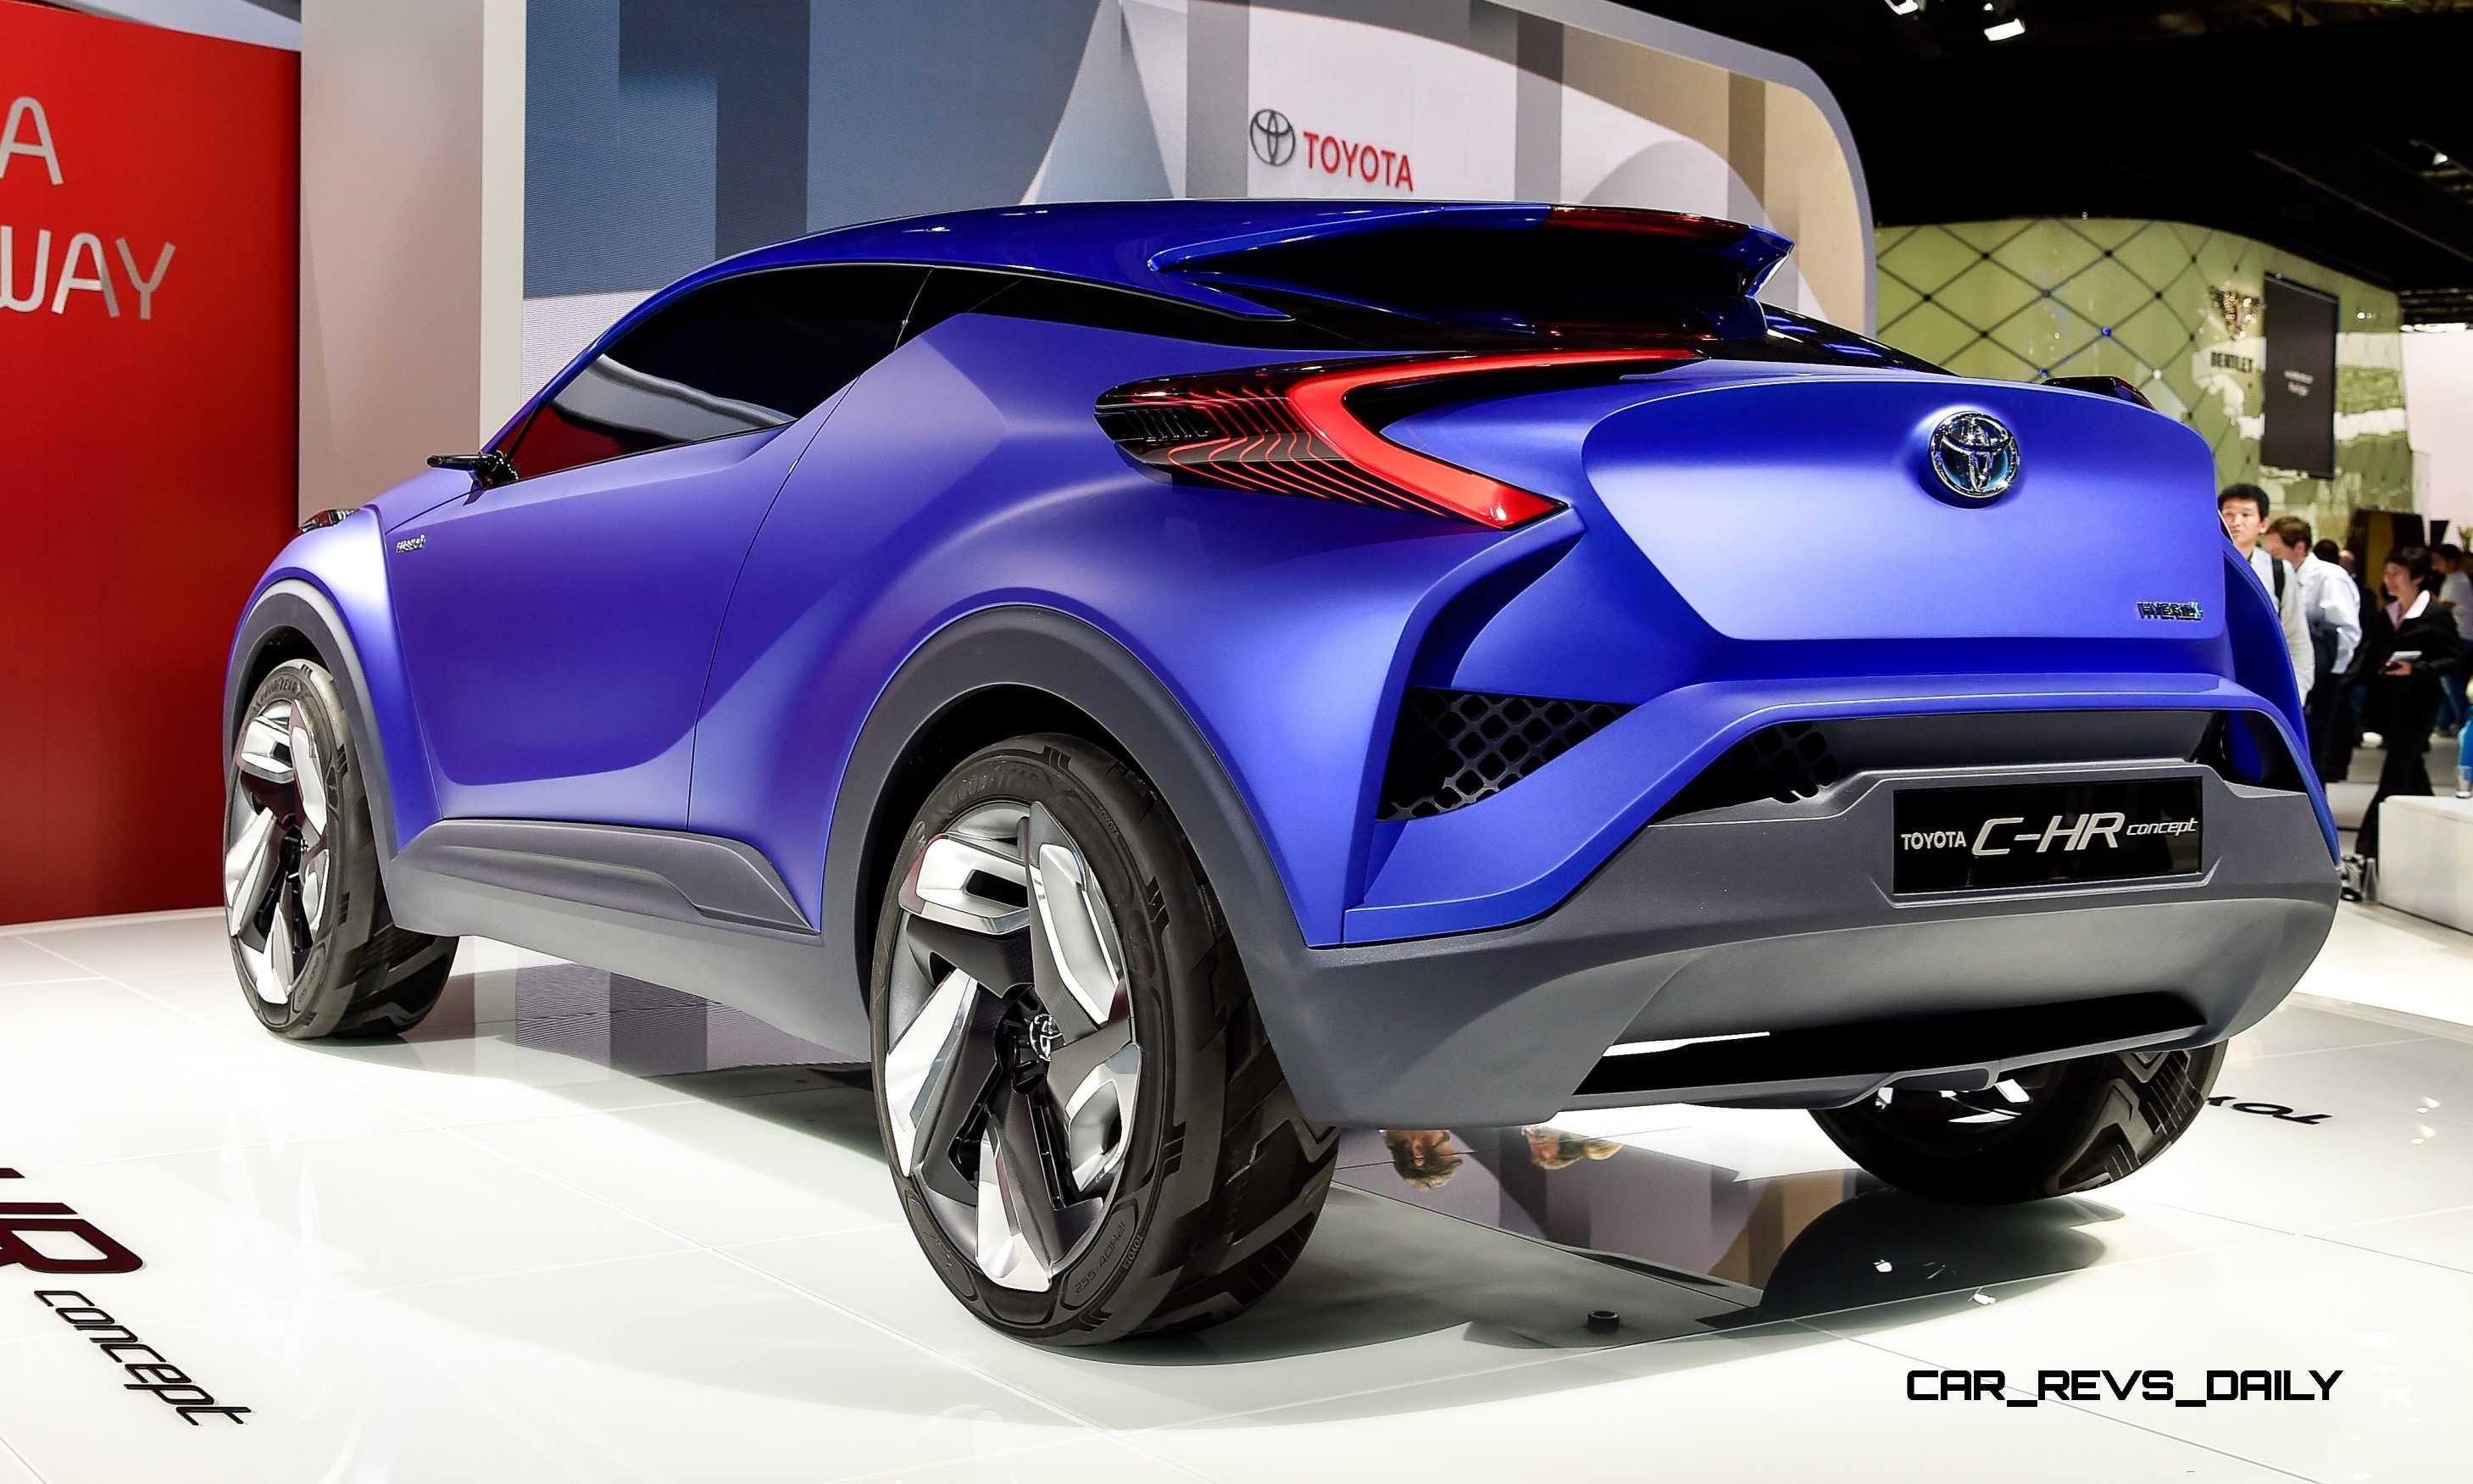 Update1 With 30 New Photos - 2014 Toyota C-HR Concept